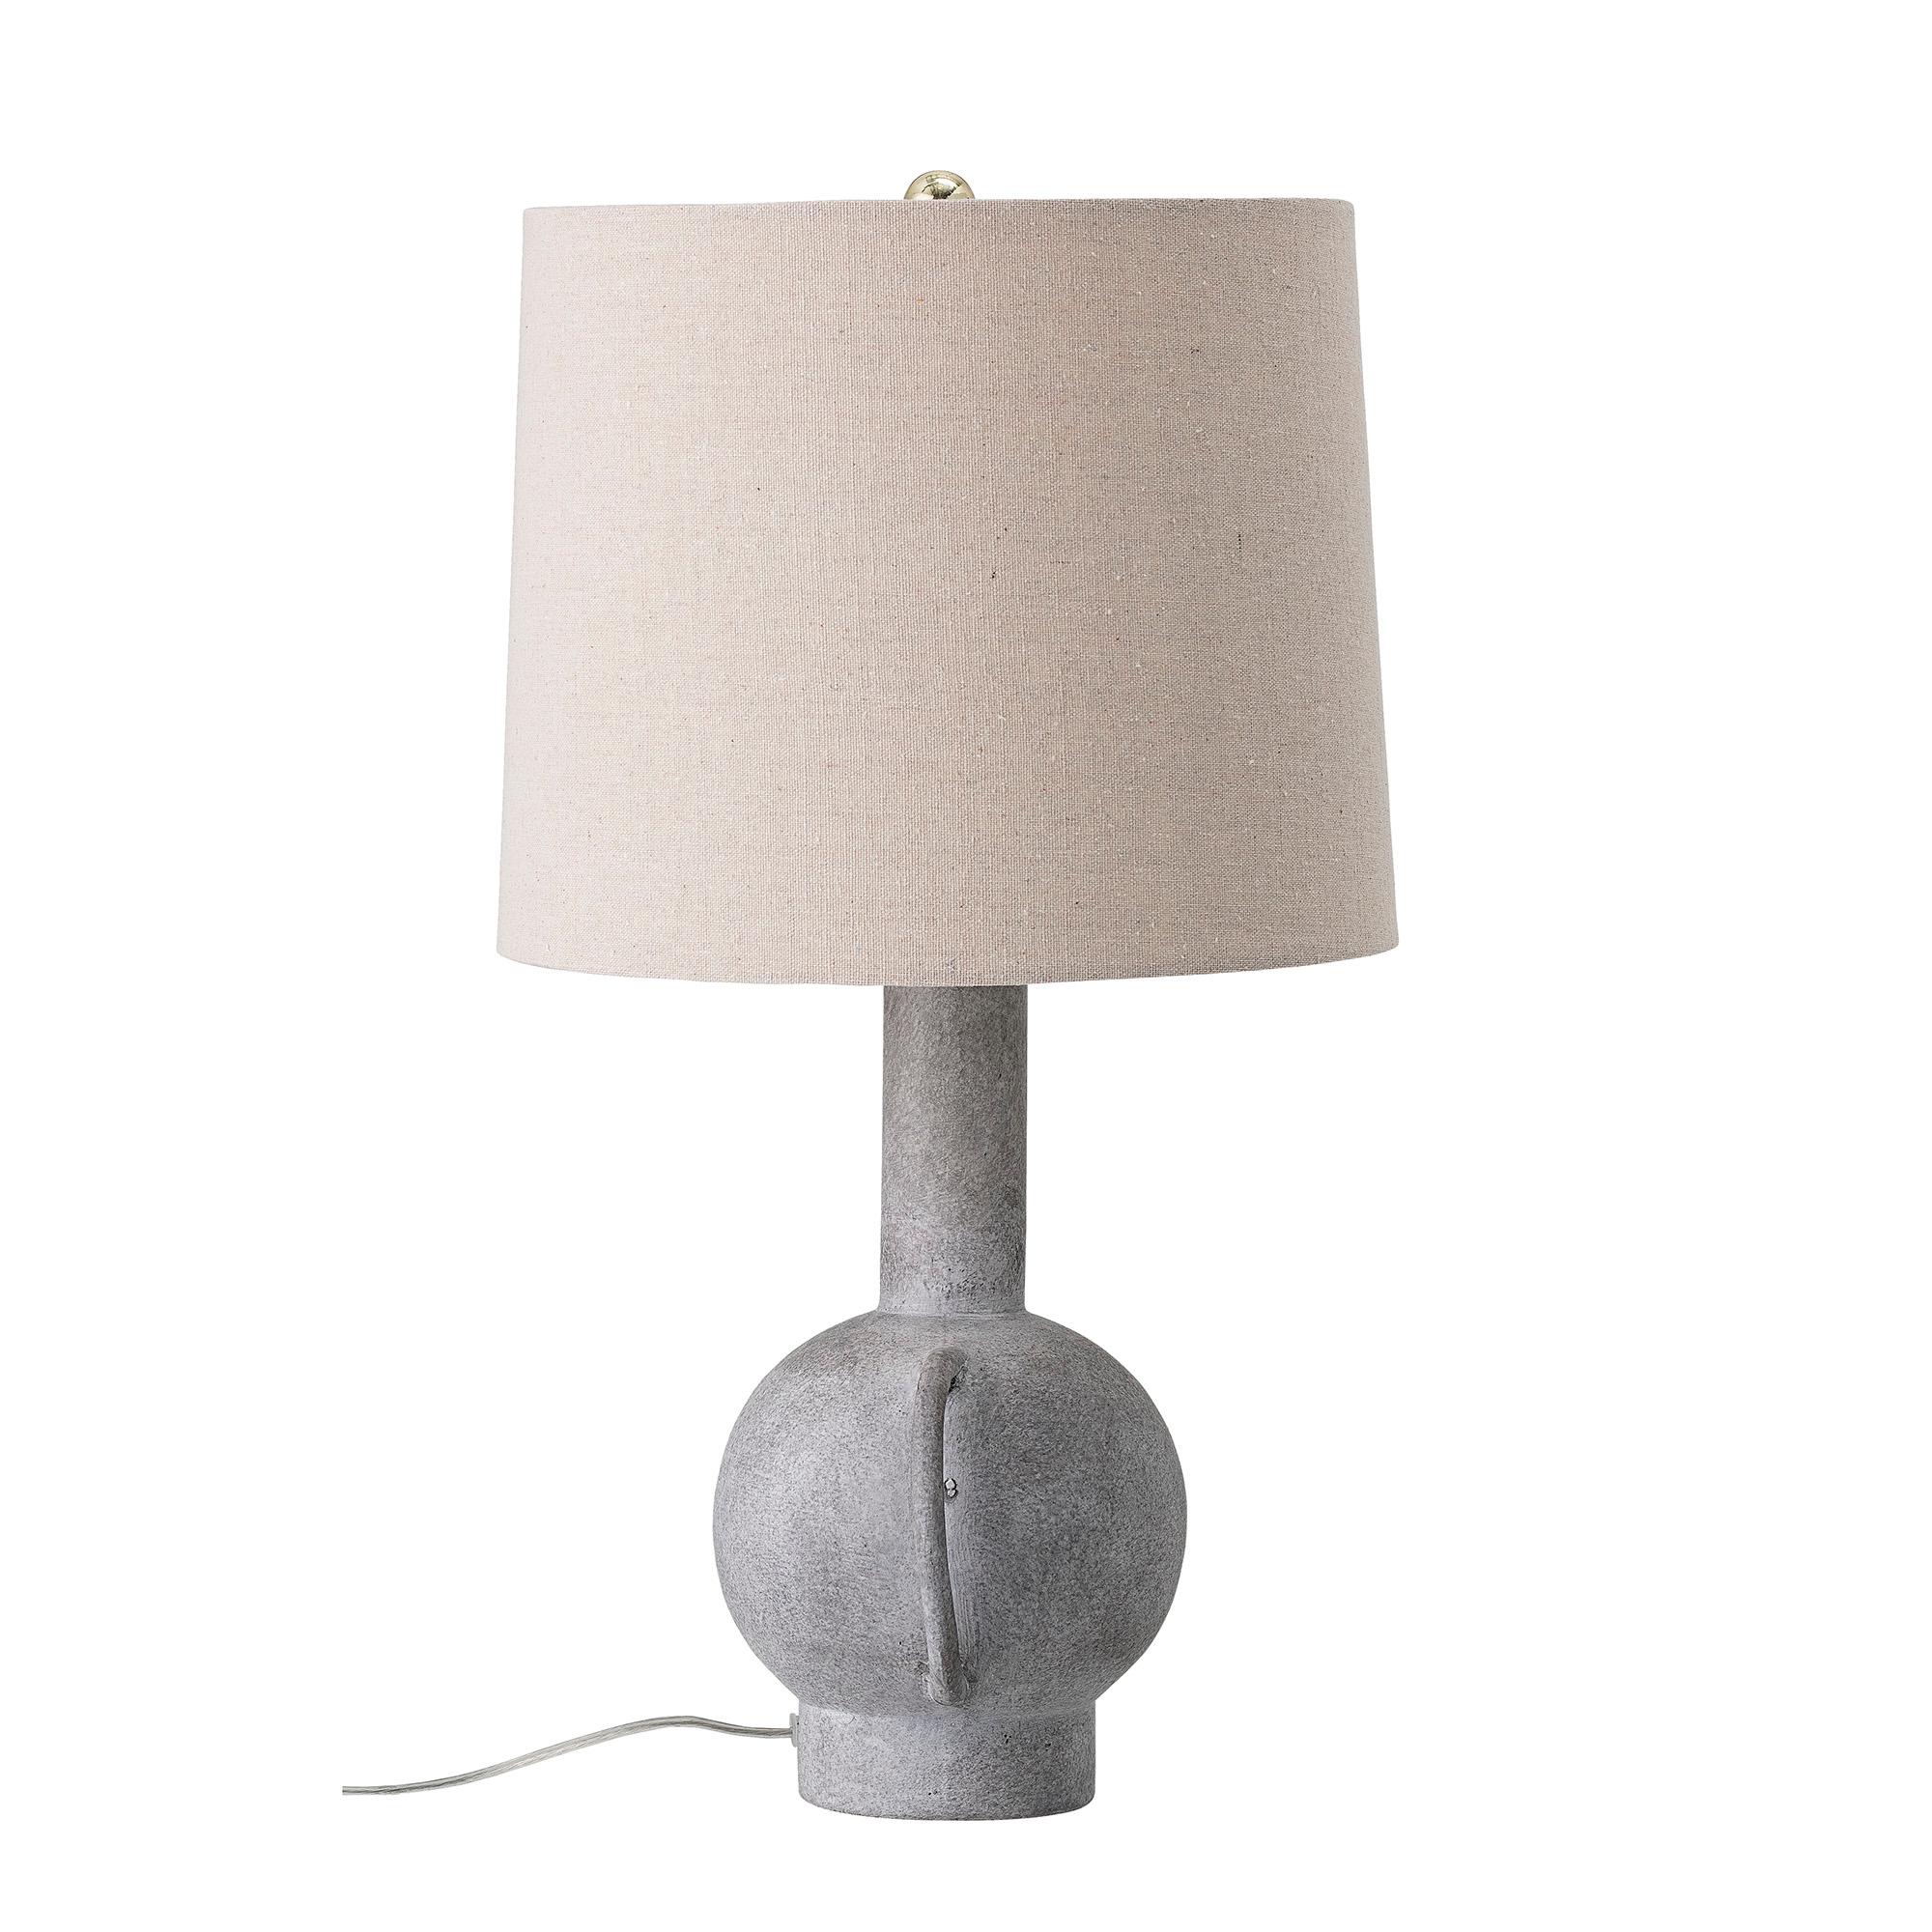 Gray terracotta, iron and linen table lamp. Available in both CE and UL versions, please specify.